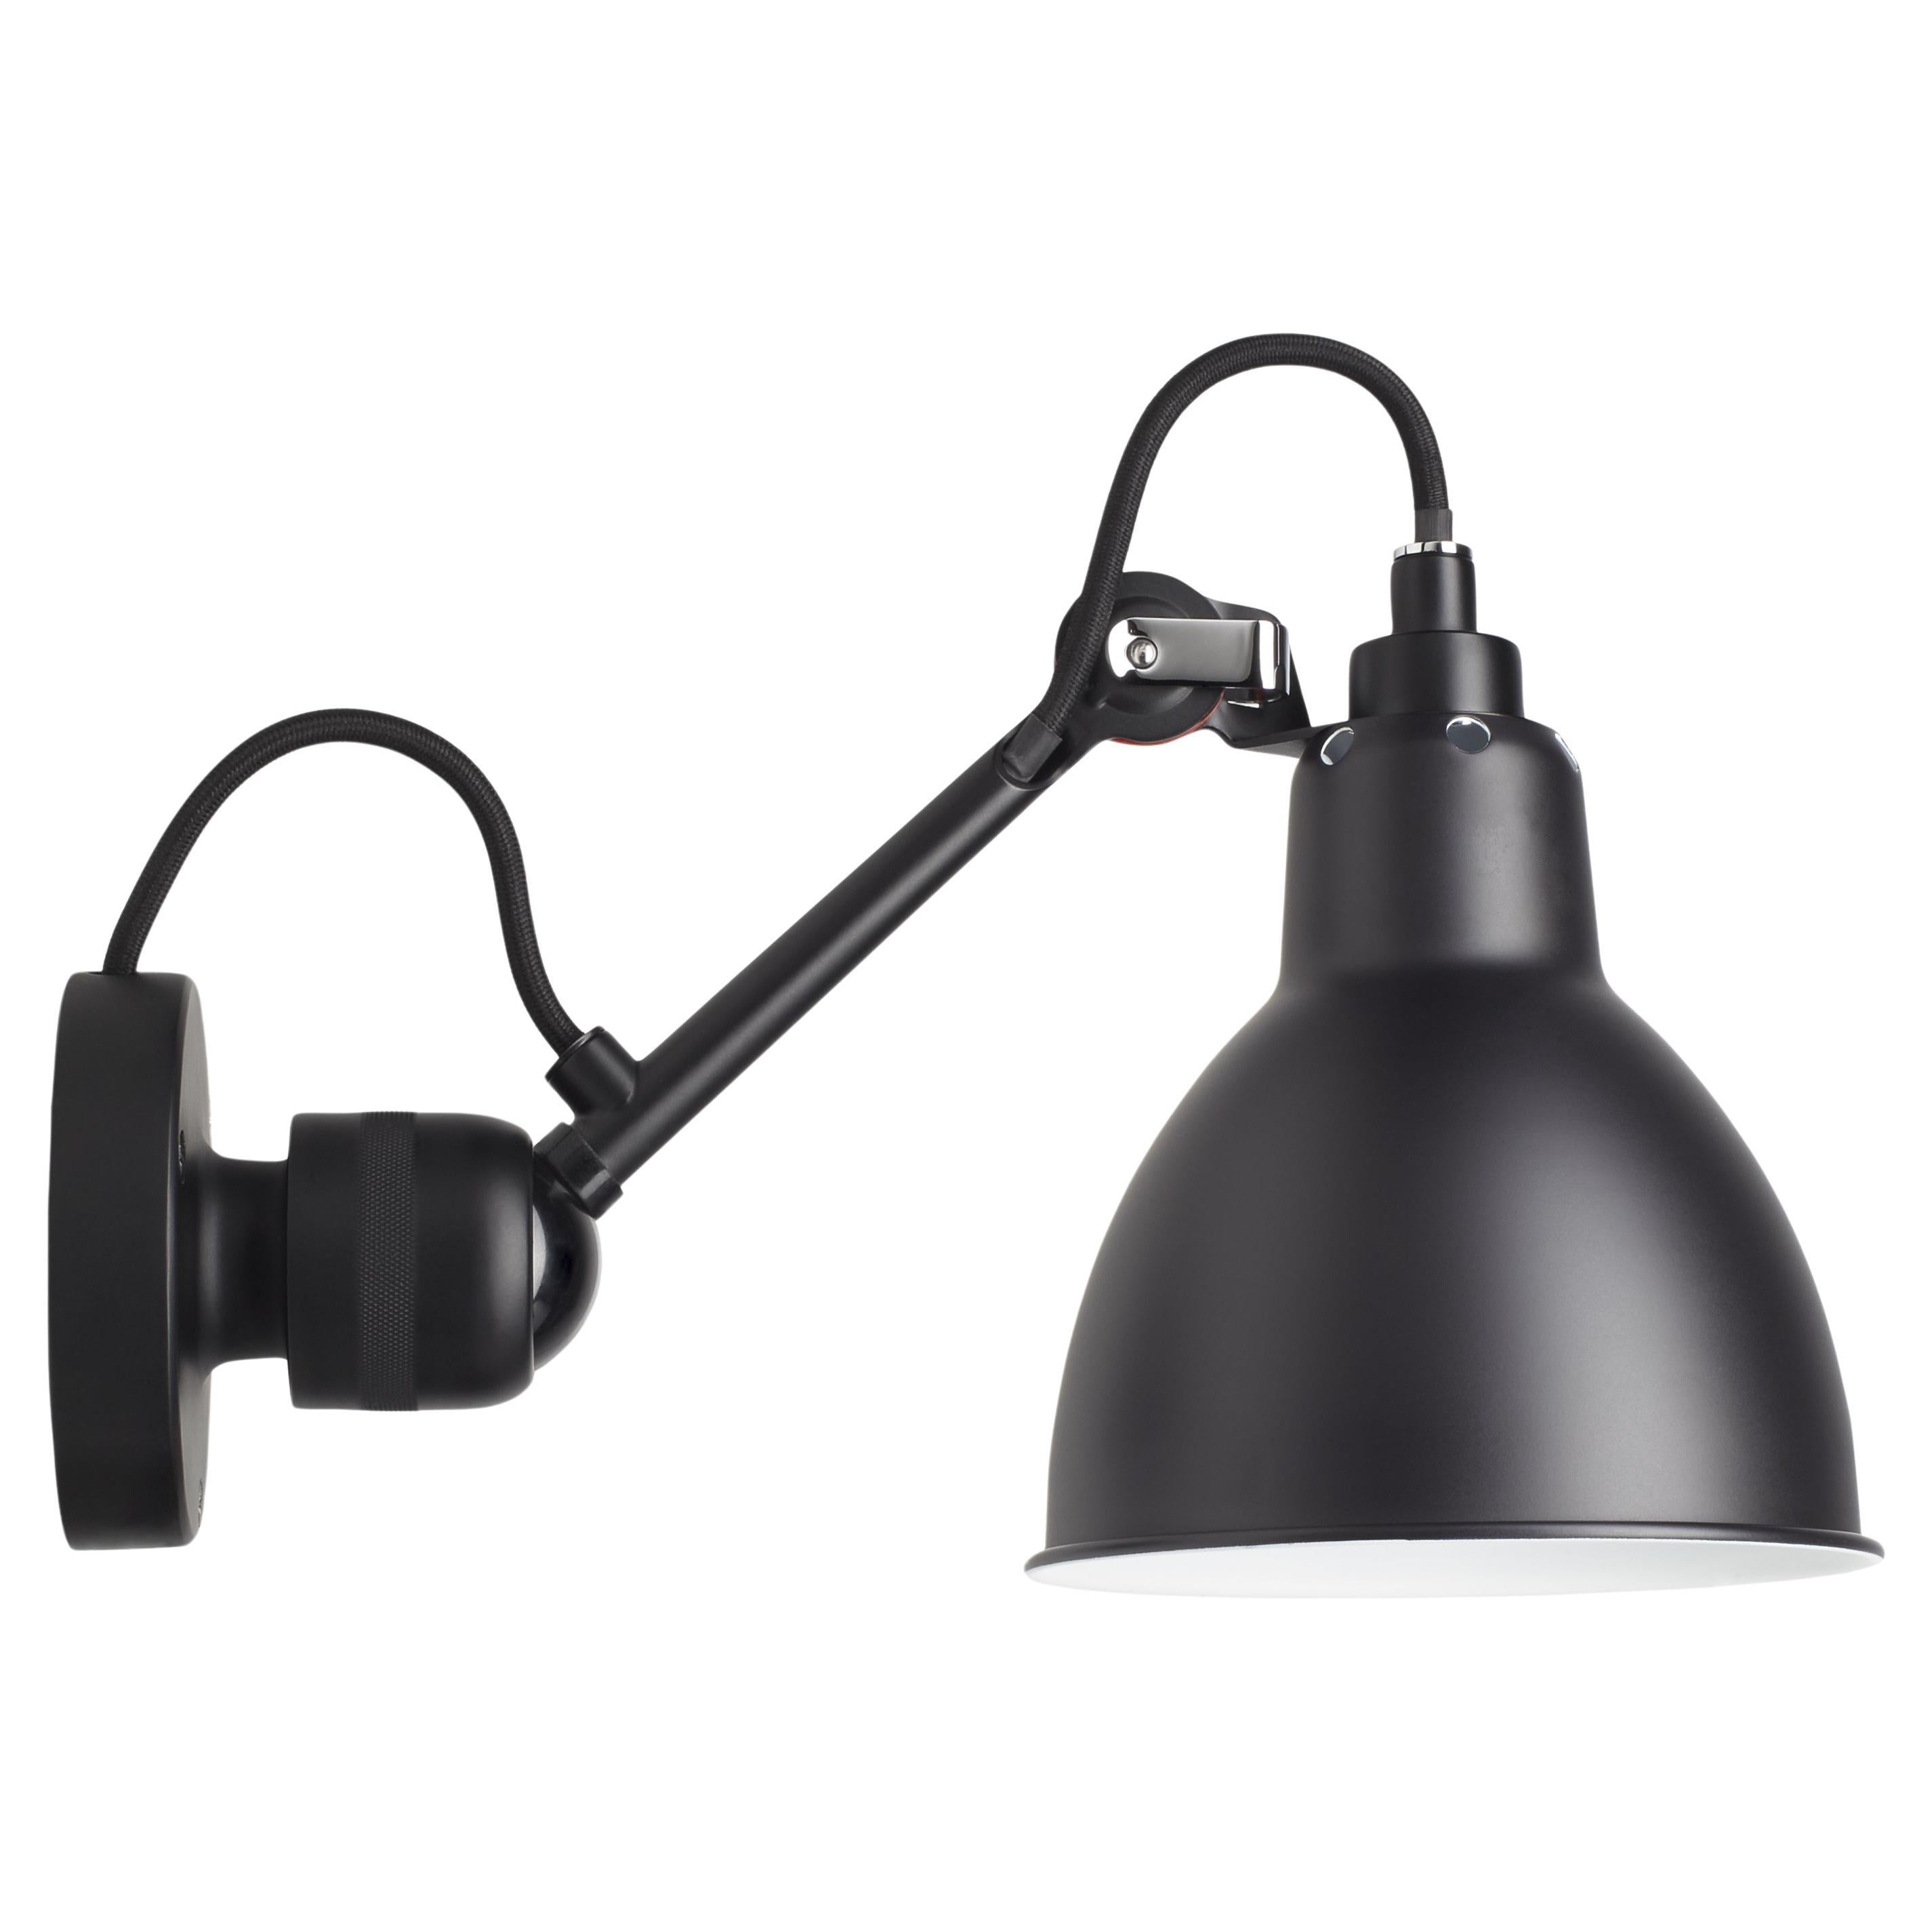 DCW Editions La Lampe Gras N°304 Wall Lamp in Black Arm and Black Shade